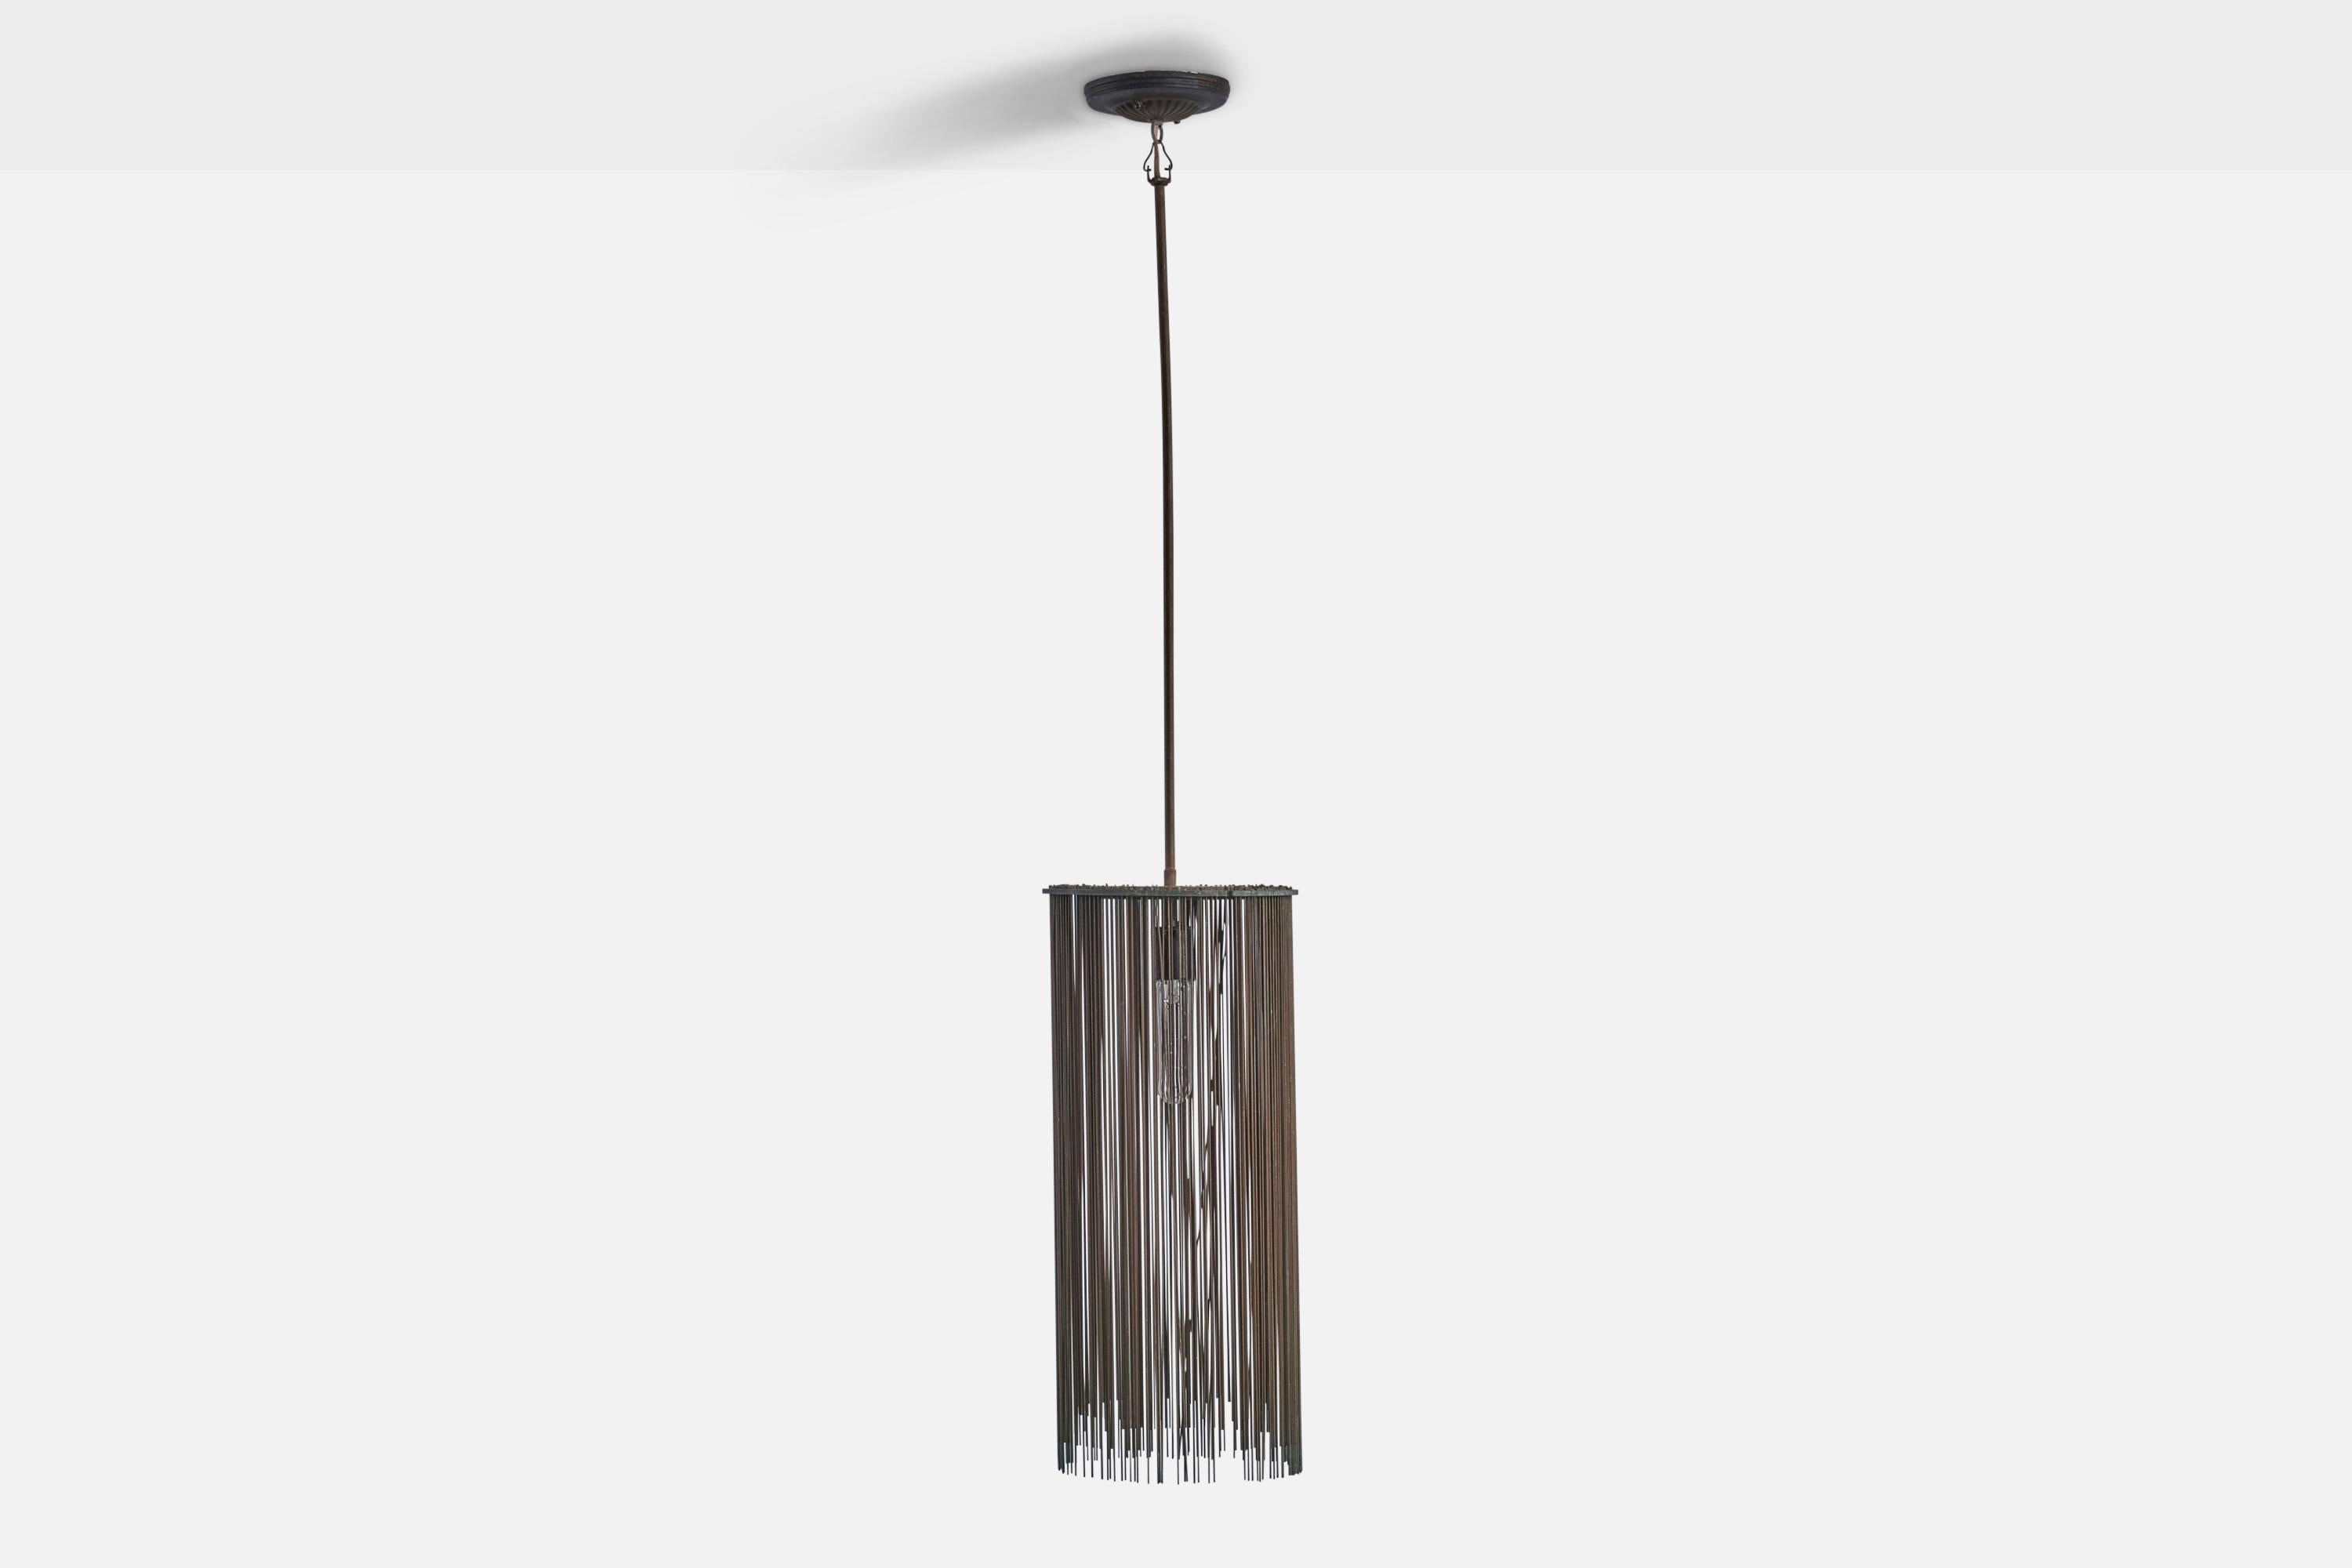 A patinated copper and bronze pendant light designed and produced by William Connell for Lesta Bertoia, daughter of Harry Bertoia, USA, c. 1985.
Overall Dimensions (inches): 48” H x 8.85” Diameter
Bulb Specifications: E-26 Bulb
Number of Sockets: